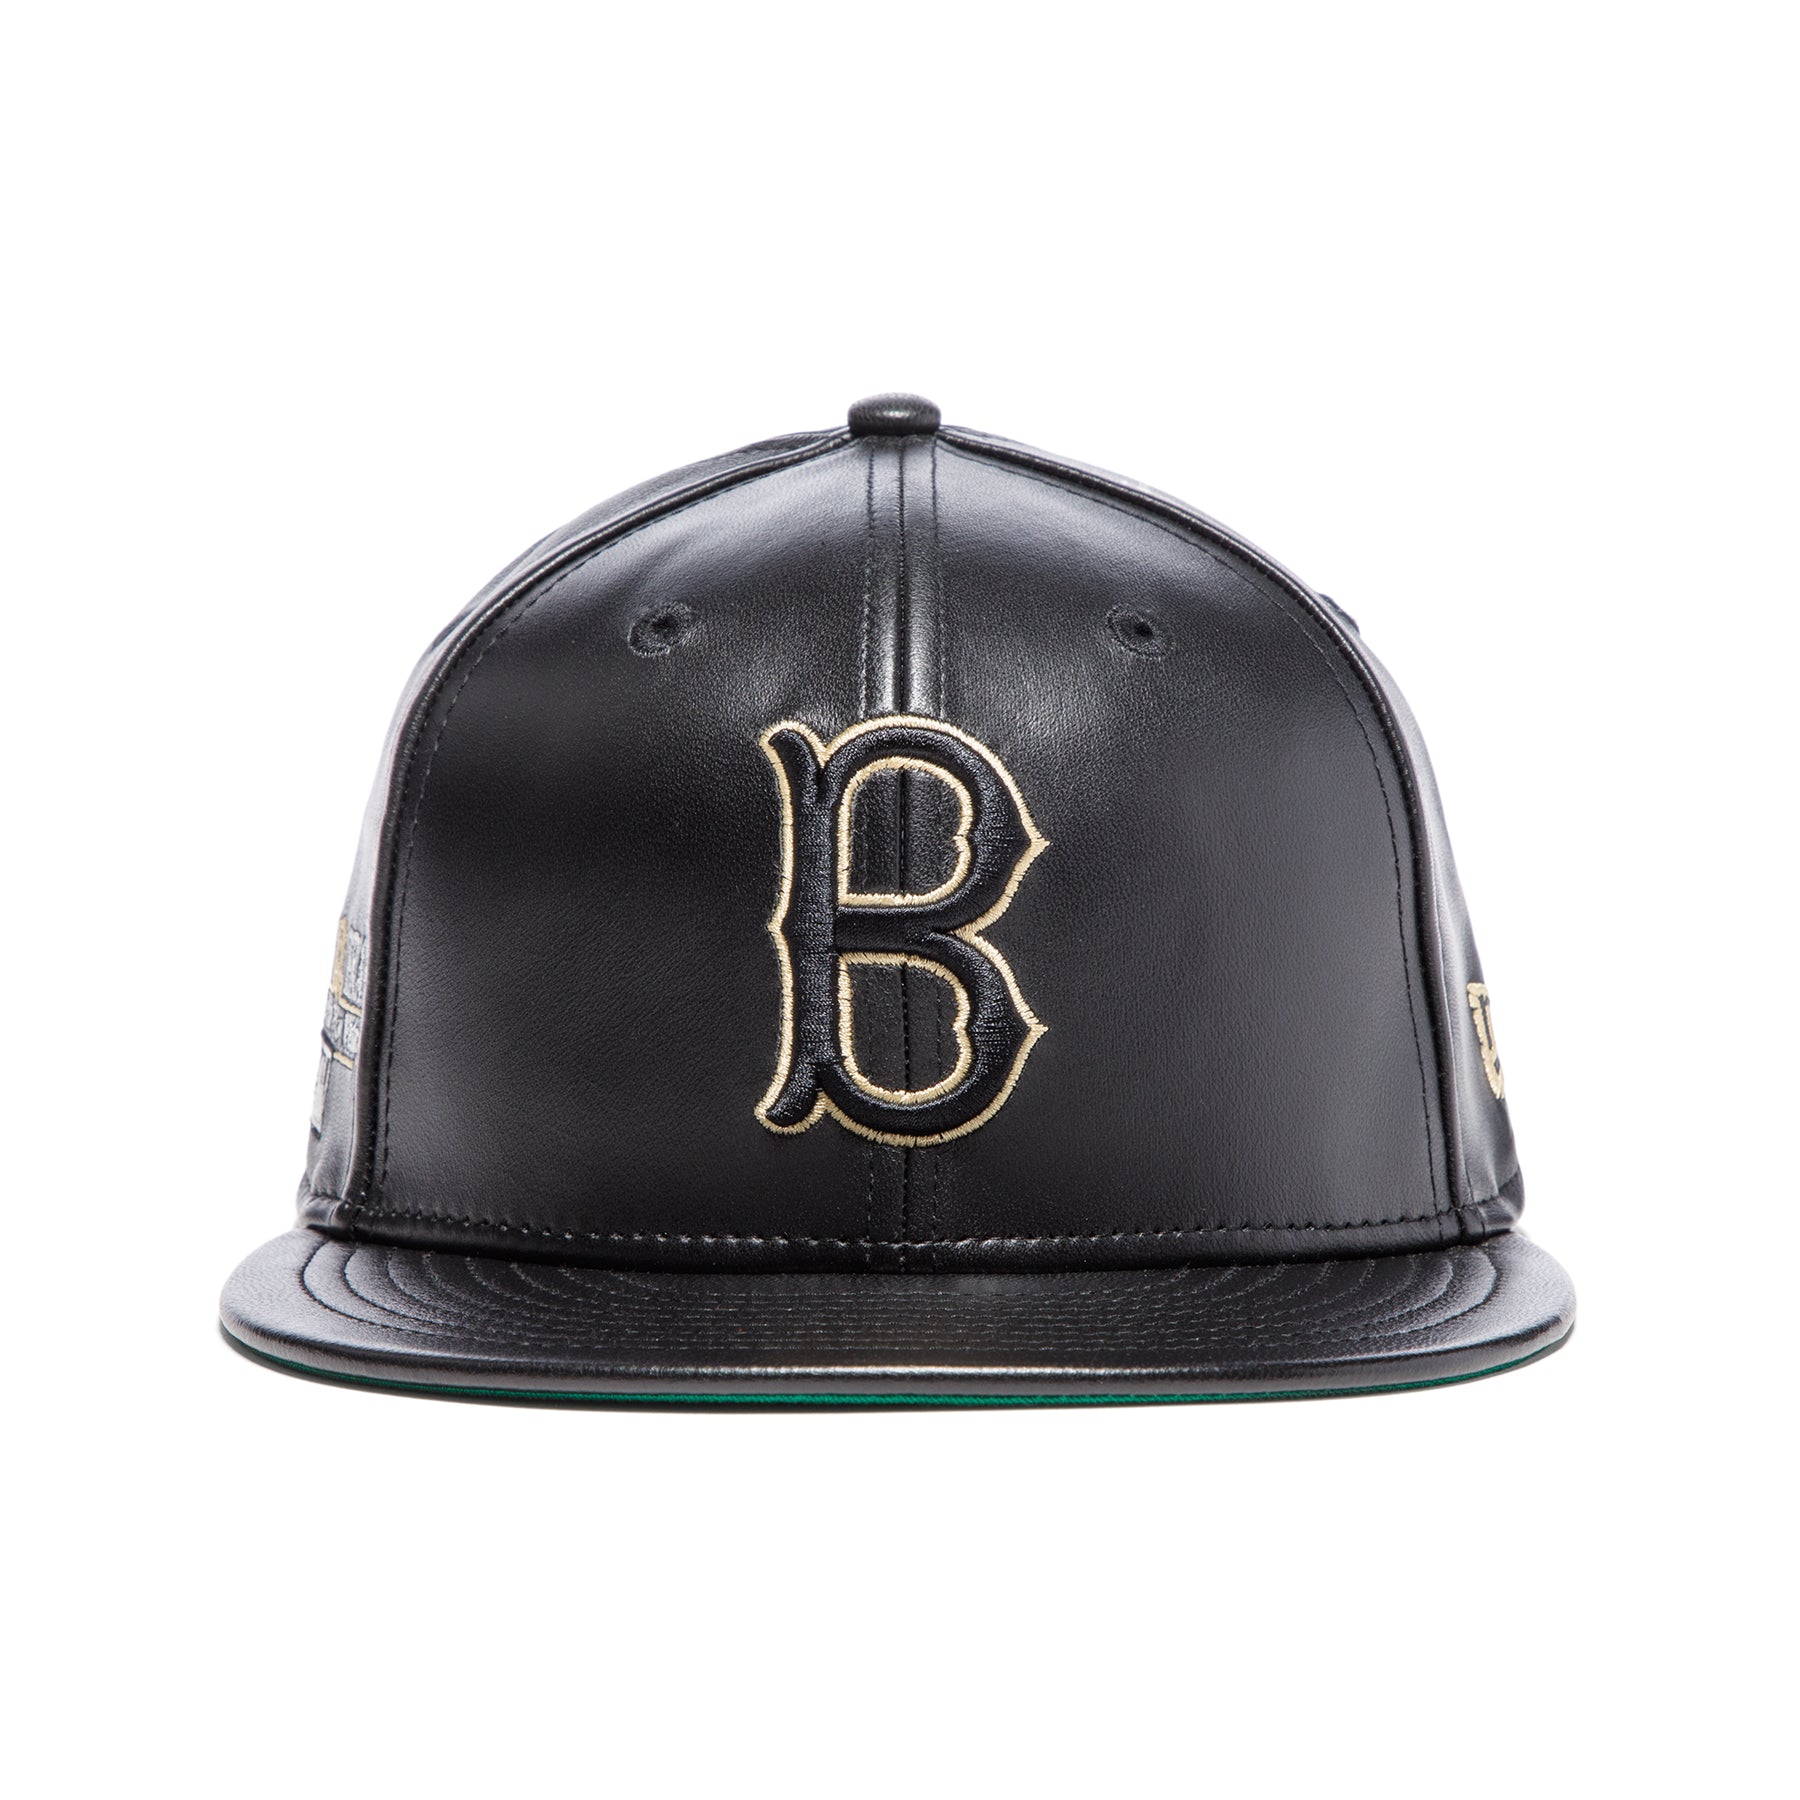 New Era 59FIFTY Fitted Hat (Black) 7